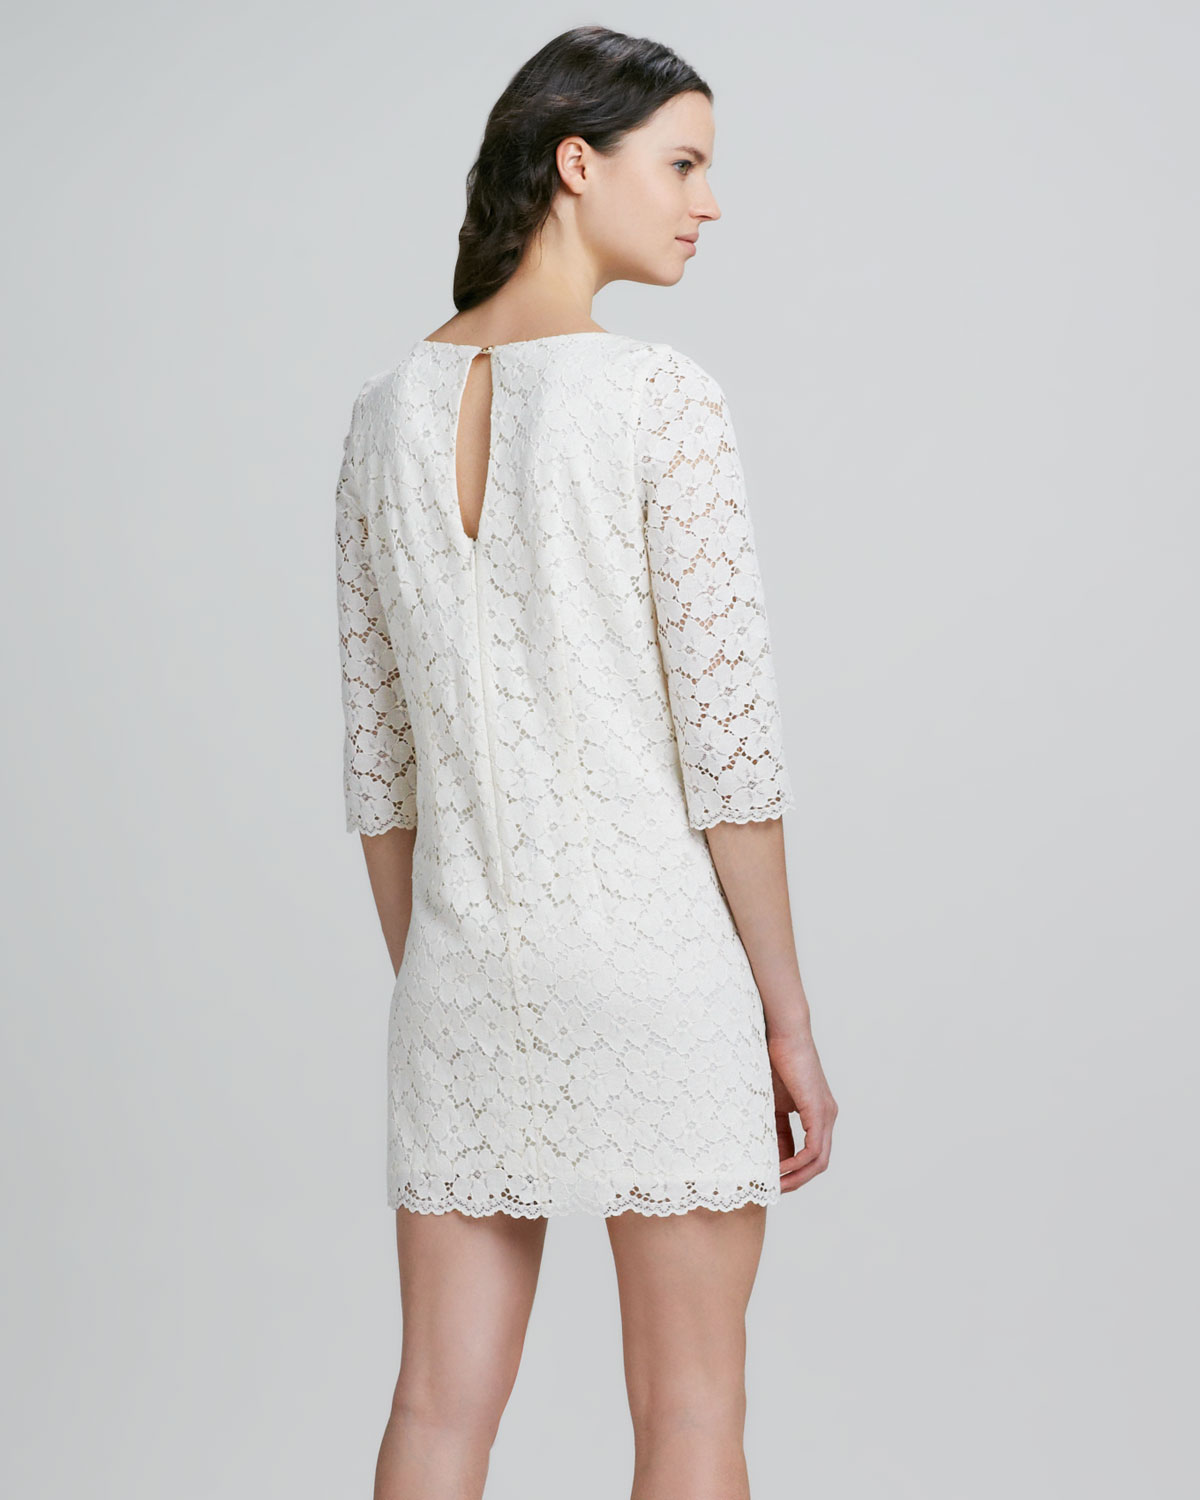 Lyst - Shoshanna Constance Lace Shift Dress Stylist Pick in White